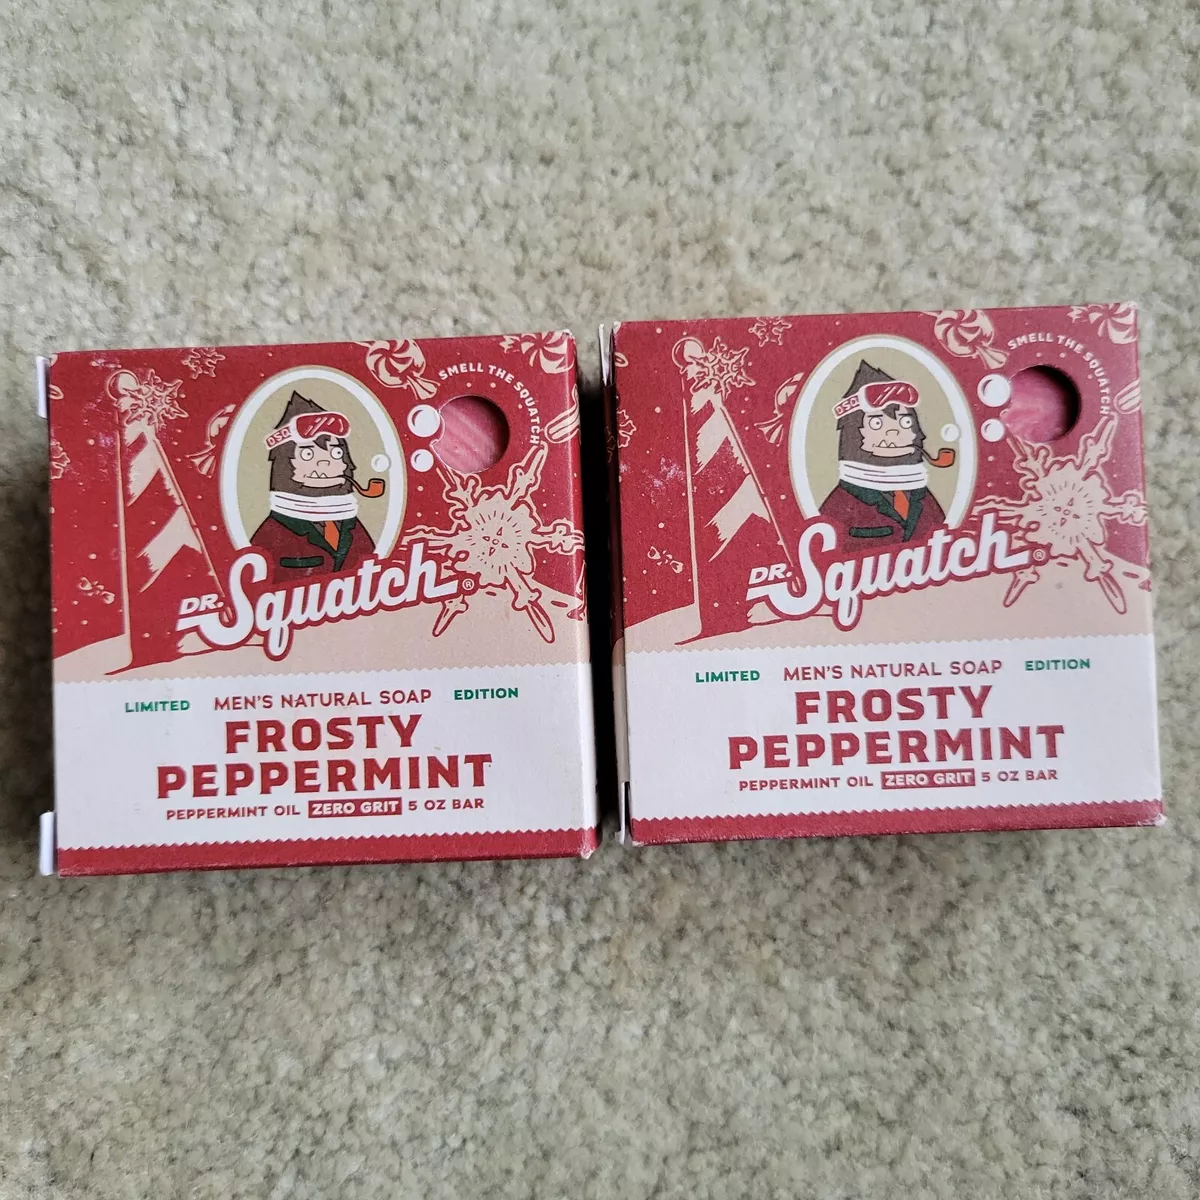 Should You Buy Dr. Squatch's Frosty Peppermint? (Part 2) 